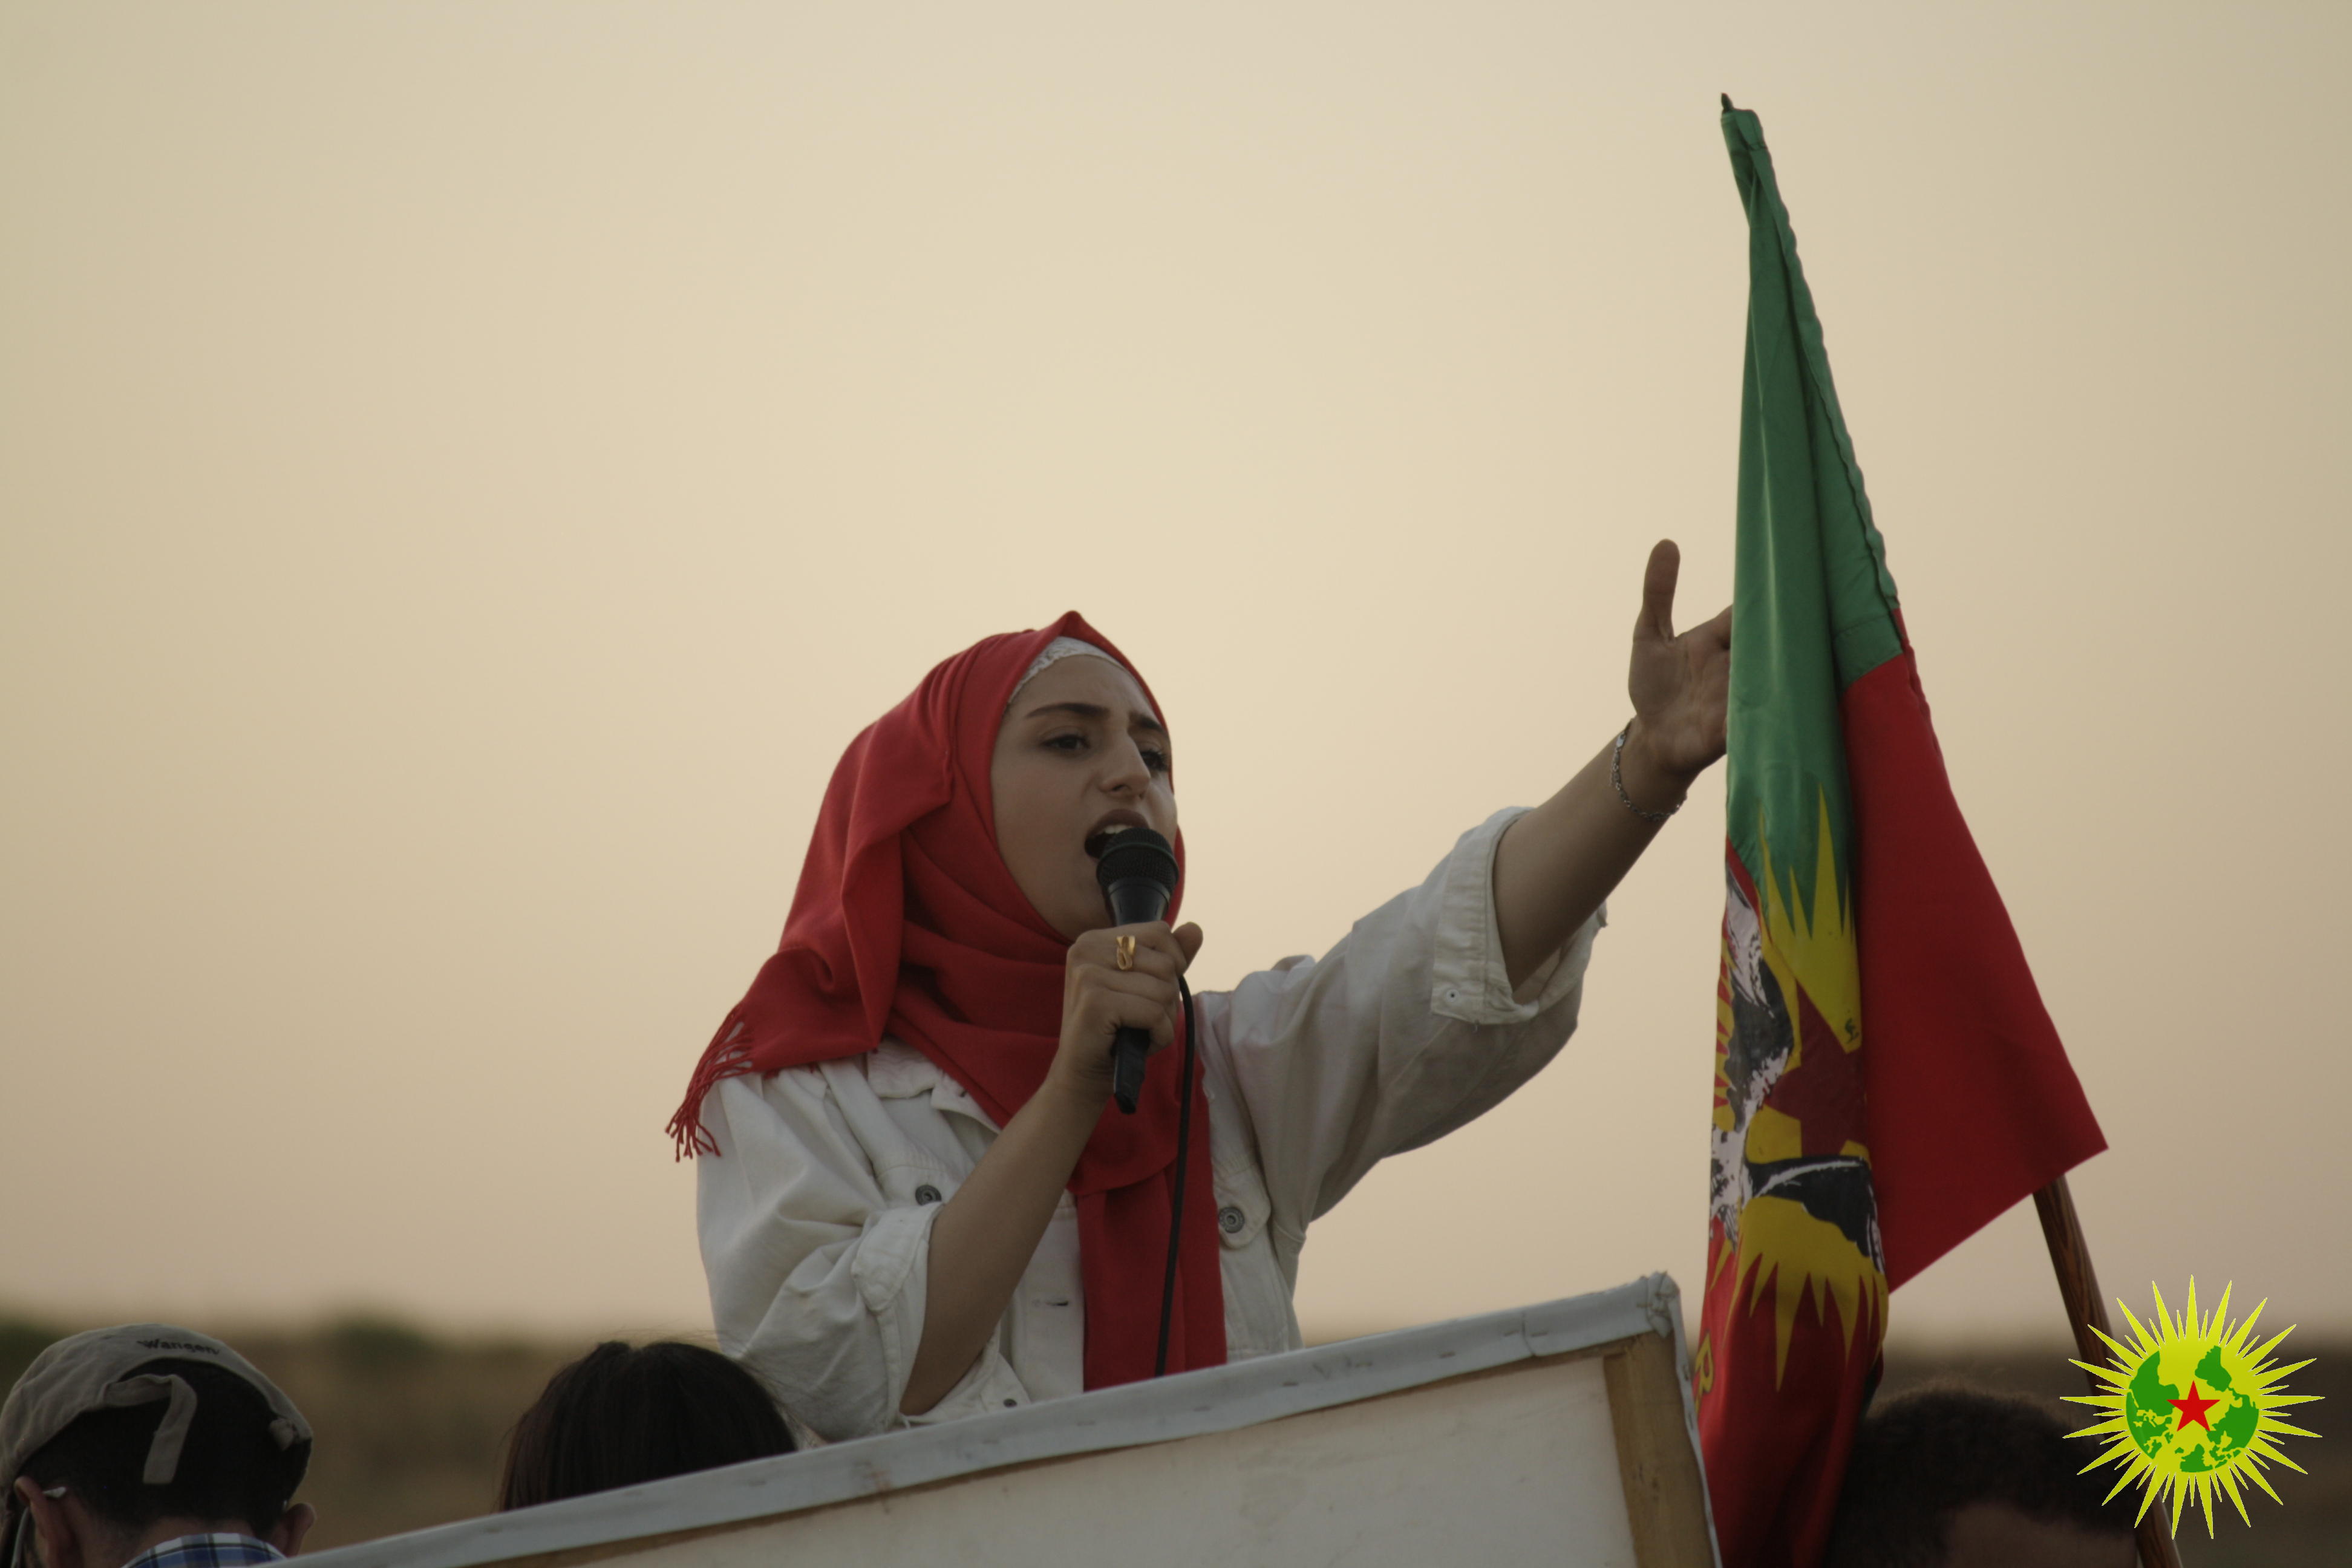 Mobilization in Rojava – Experiences of an internationalist